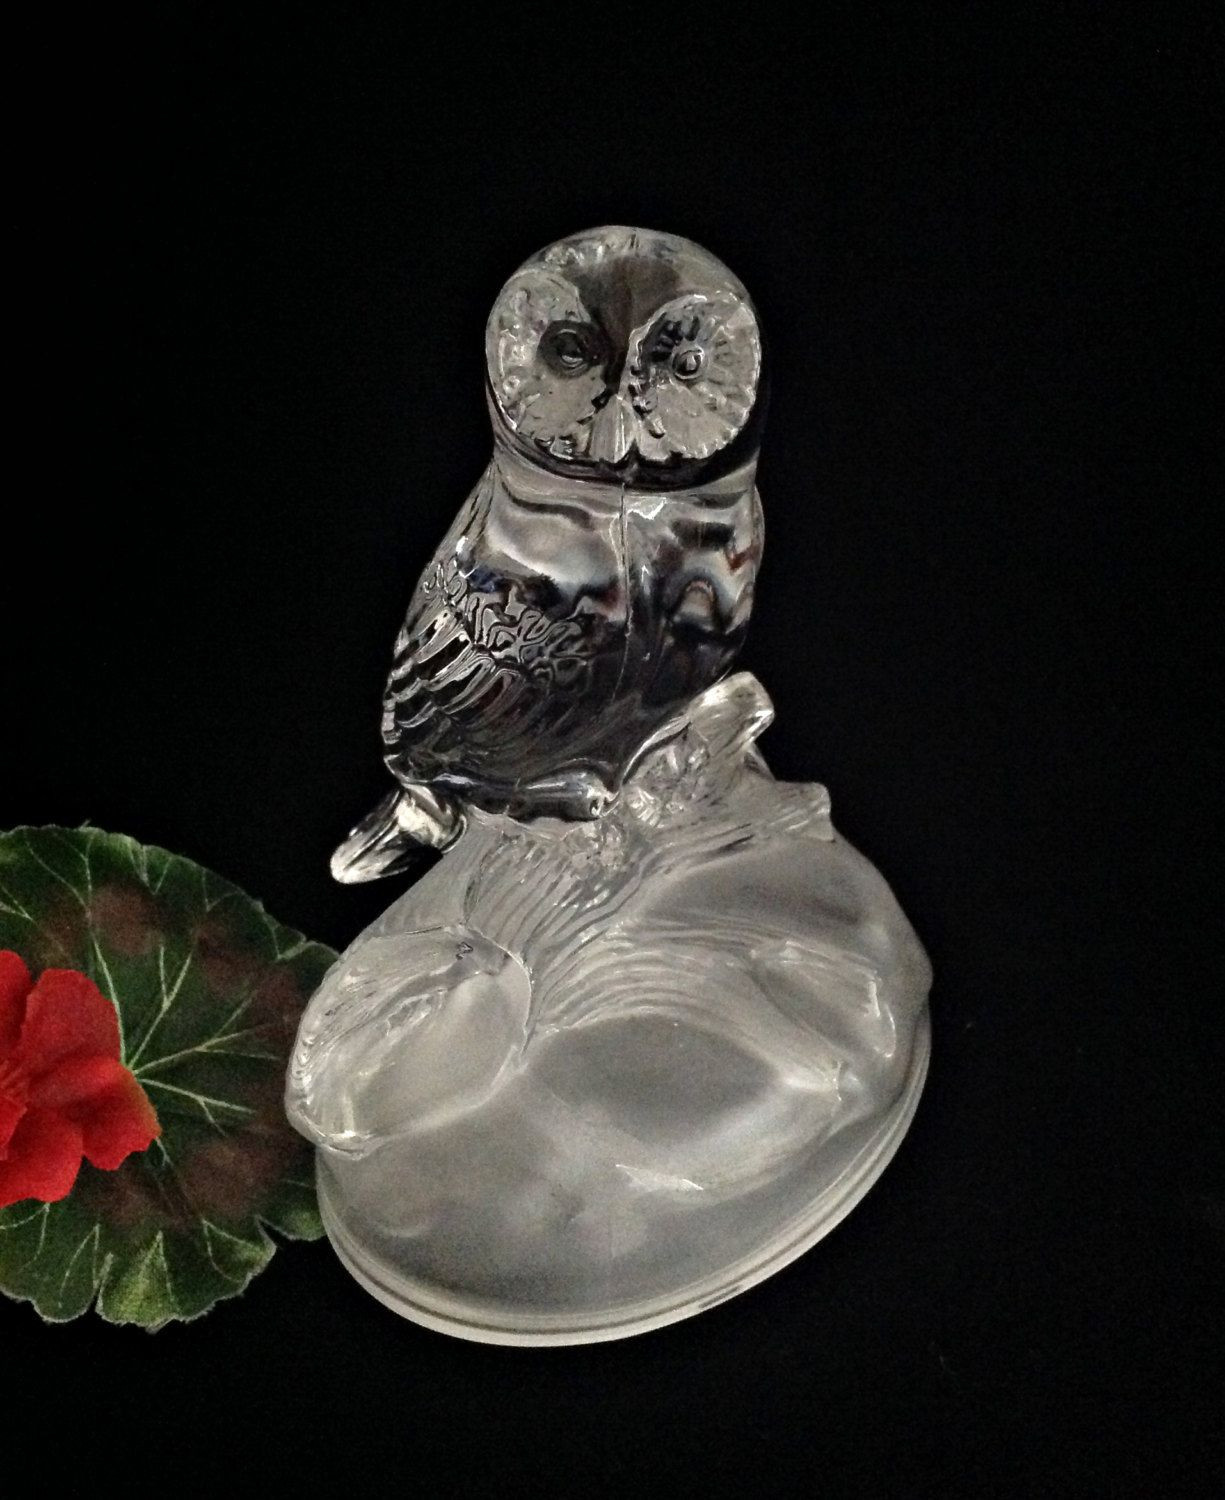 hofbauer red bird crystal vase of lead crystal owl figurine 24 cristal darques france glass animals in owl figurine 24 lead crystal cristal darques france glass animals by anniesoldstuff on